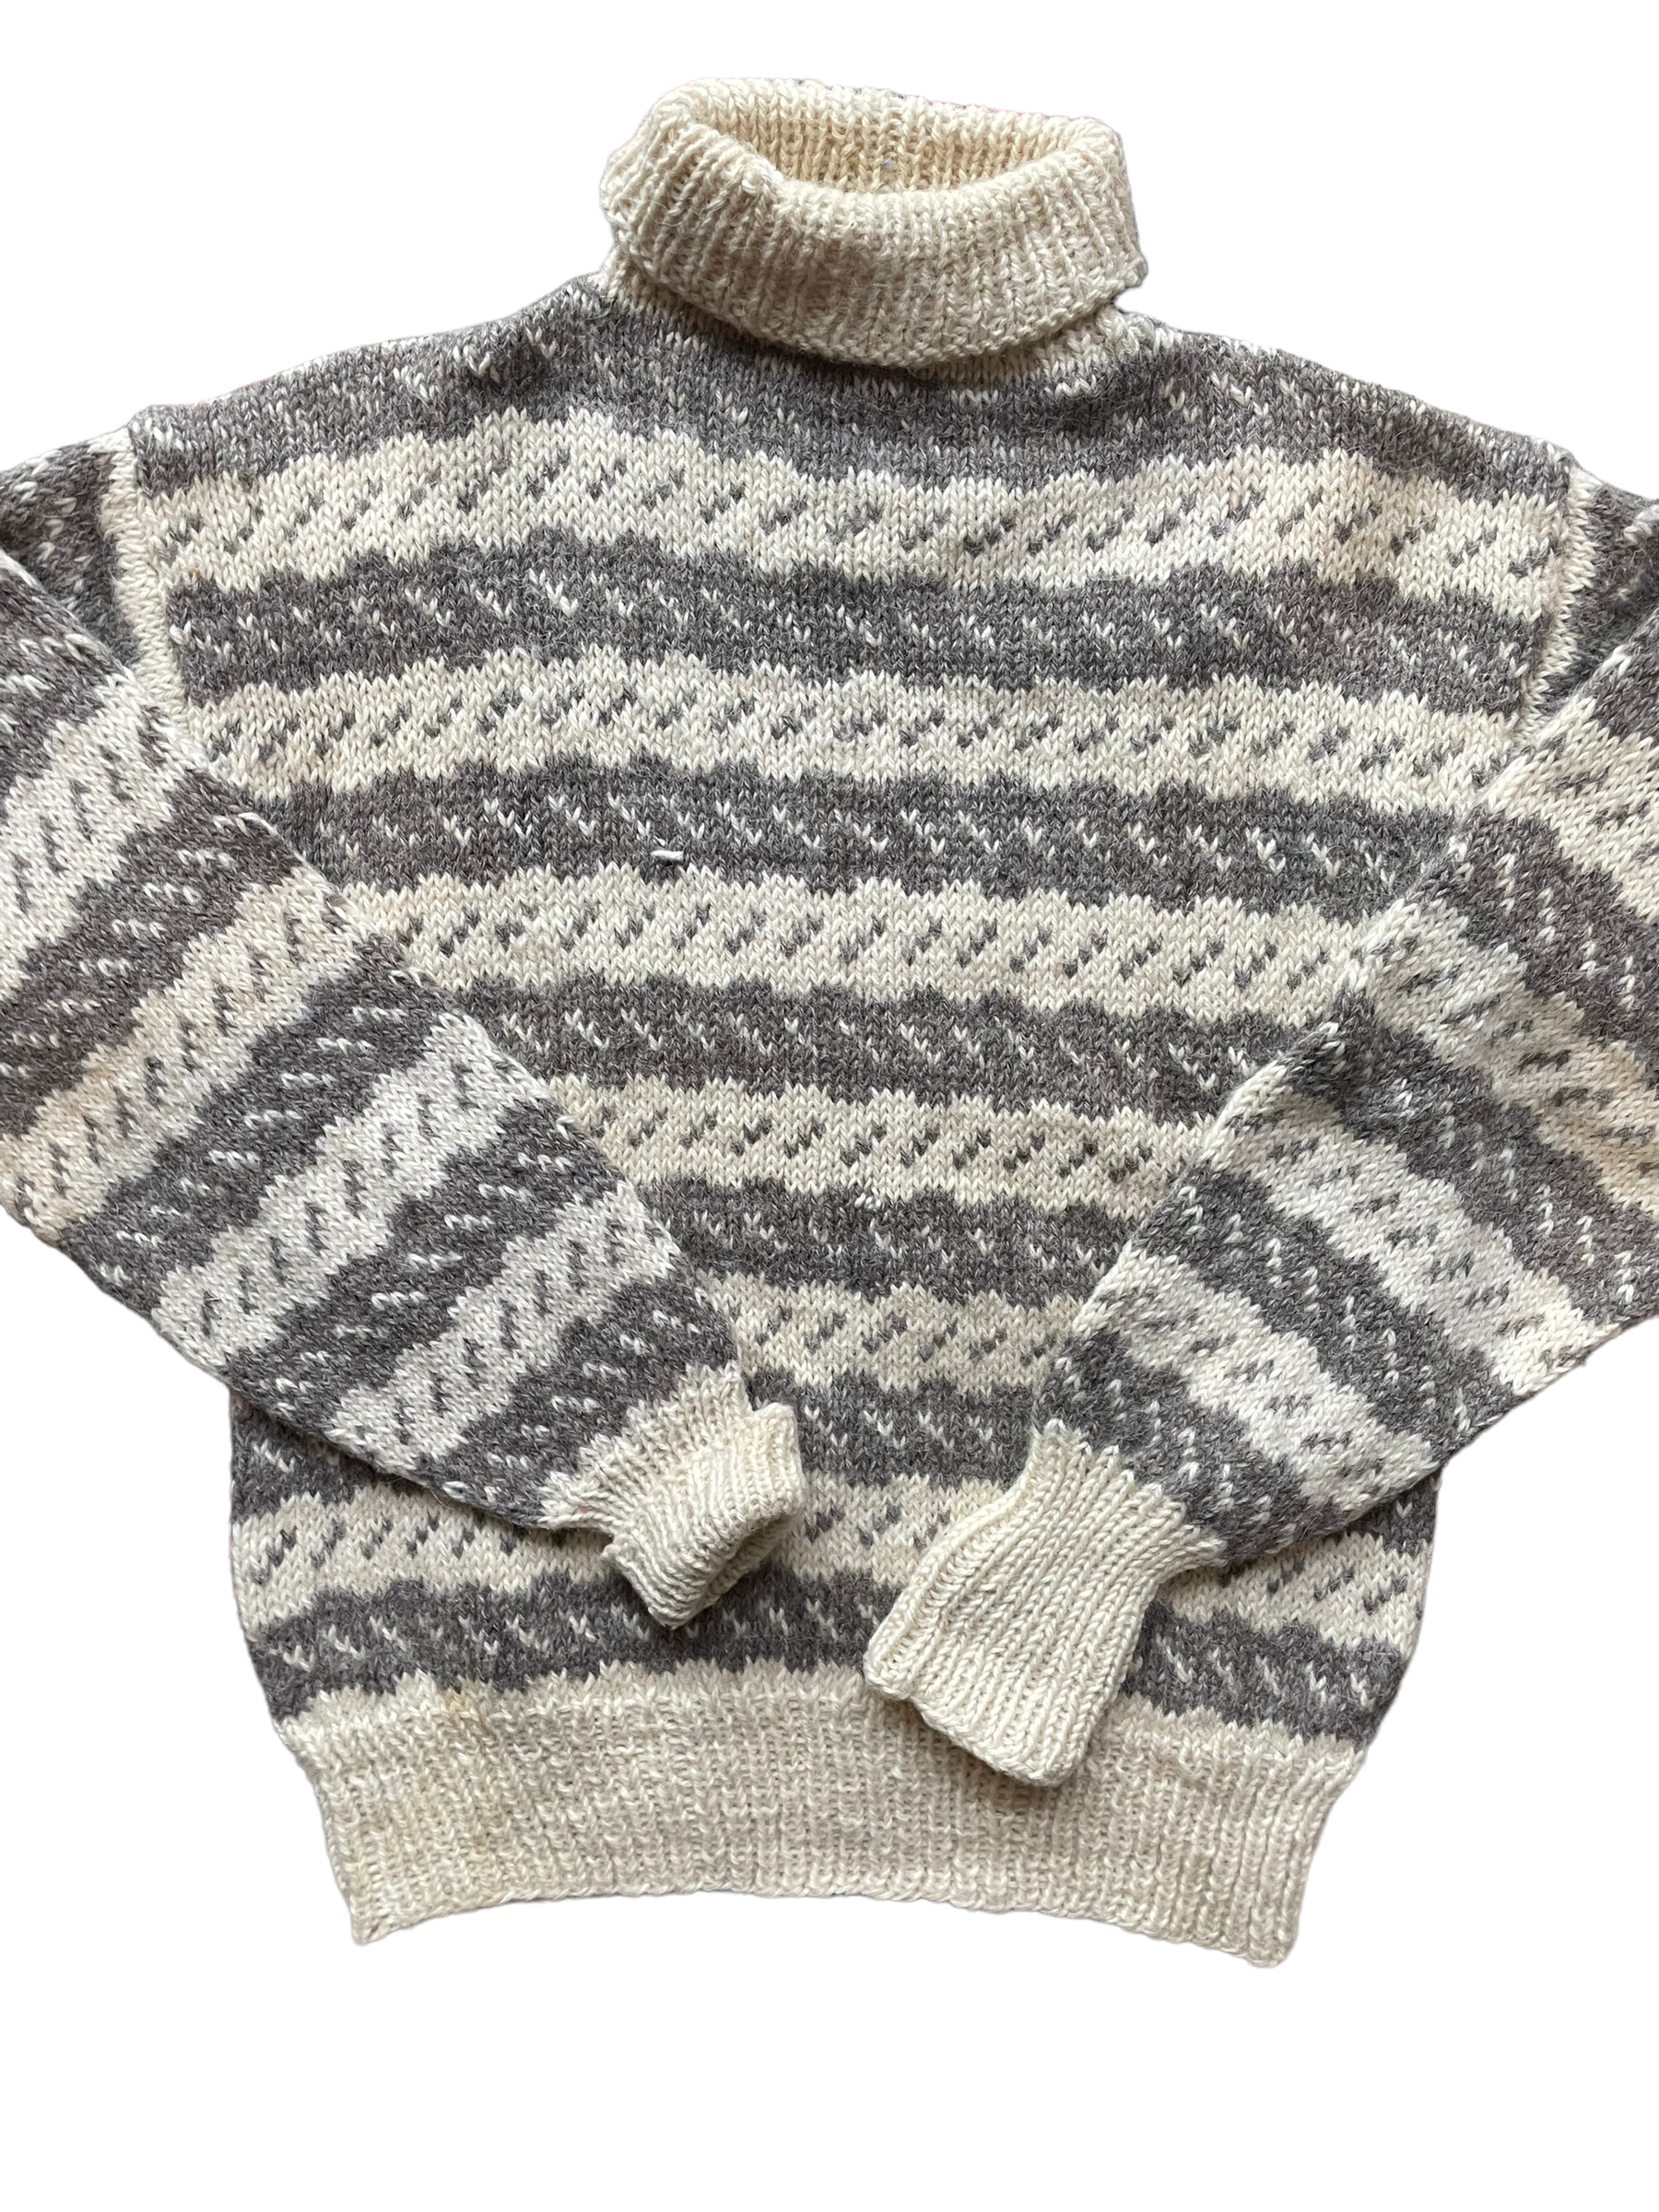 Vintage Wool Sweater Made in Denmark |  Barn Owl Seattle | Seattle Vintage Sweaters Full front view